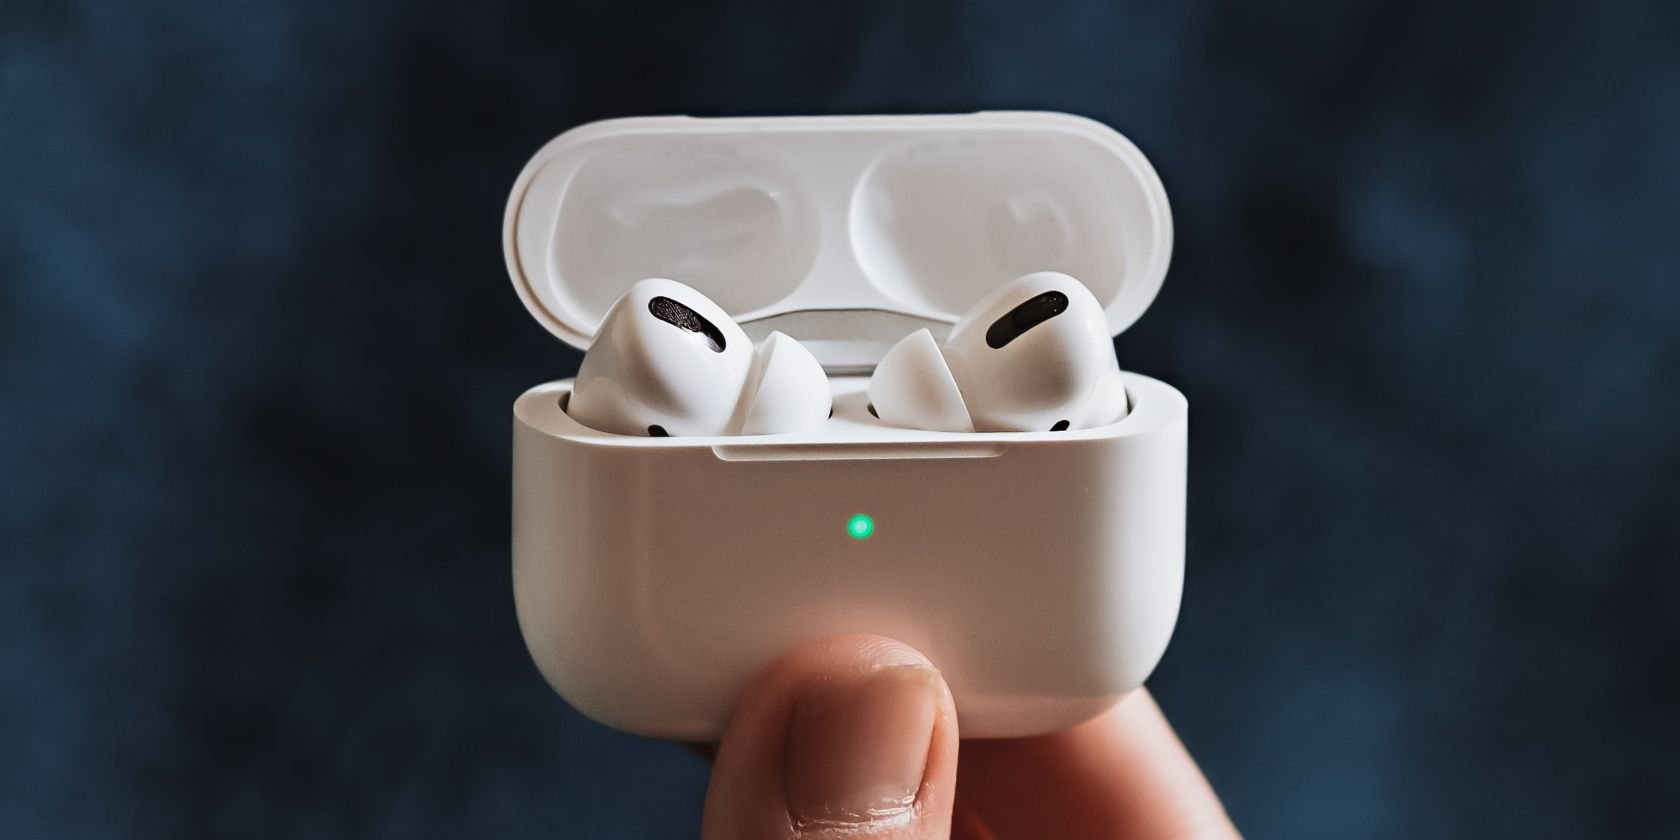 How to Charge Your AirPods Pro or AirPods